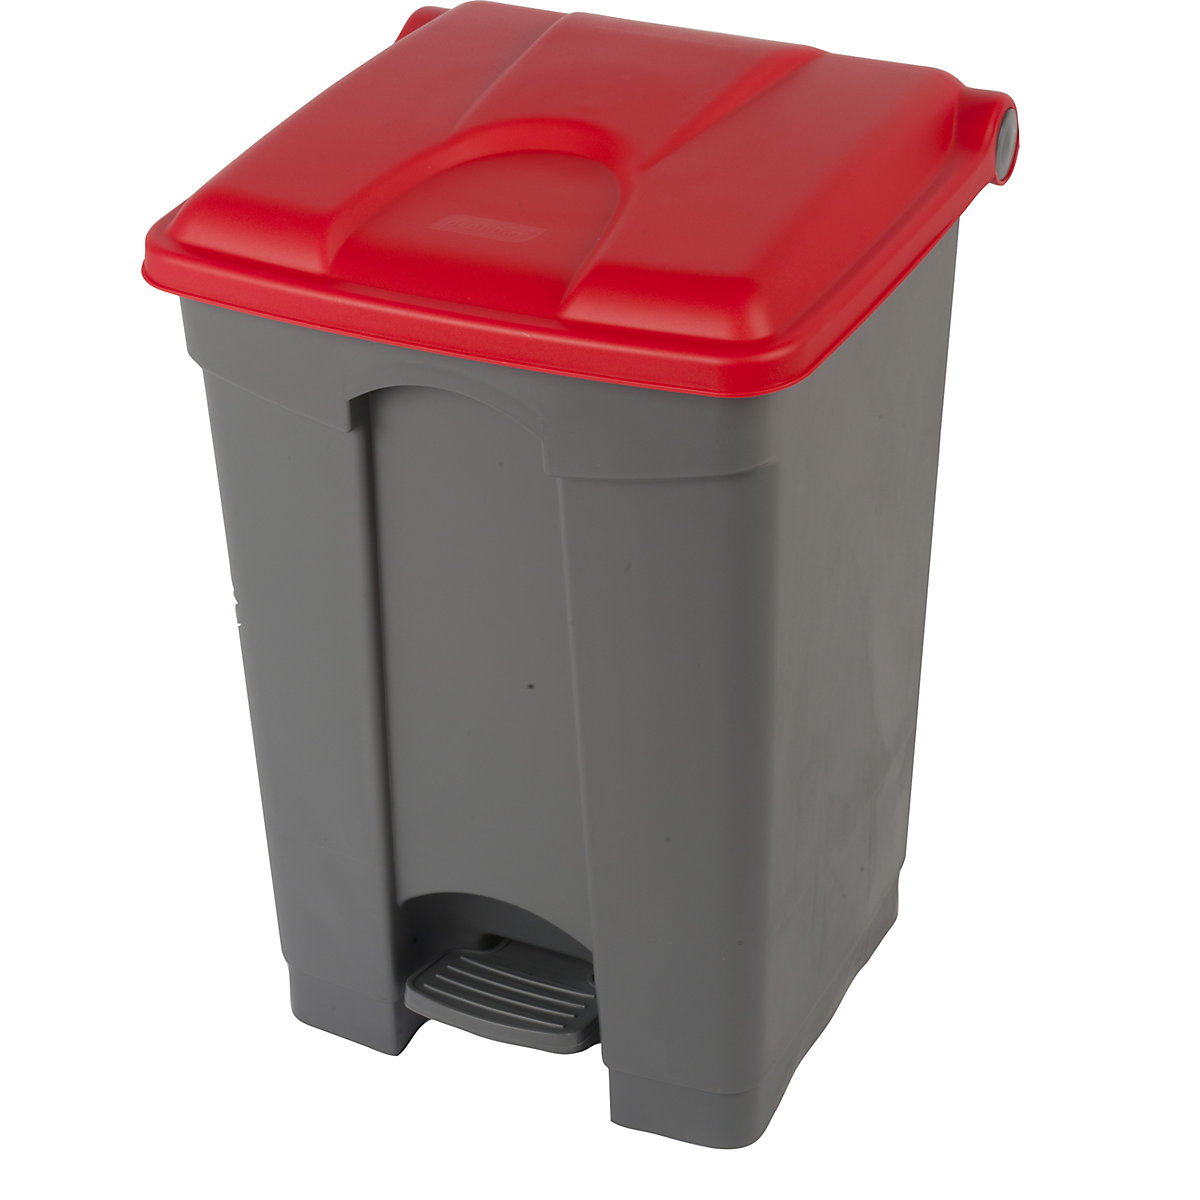 EUROKRAFTbasic – Pedal waste collector, capacity 45 l, WxHxD 410 x 600 x 400 mm, grey, red lid